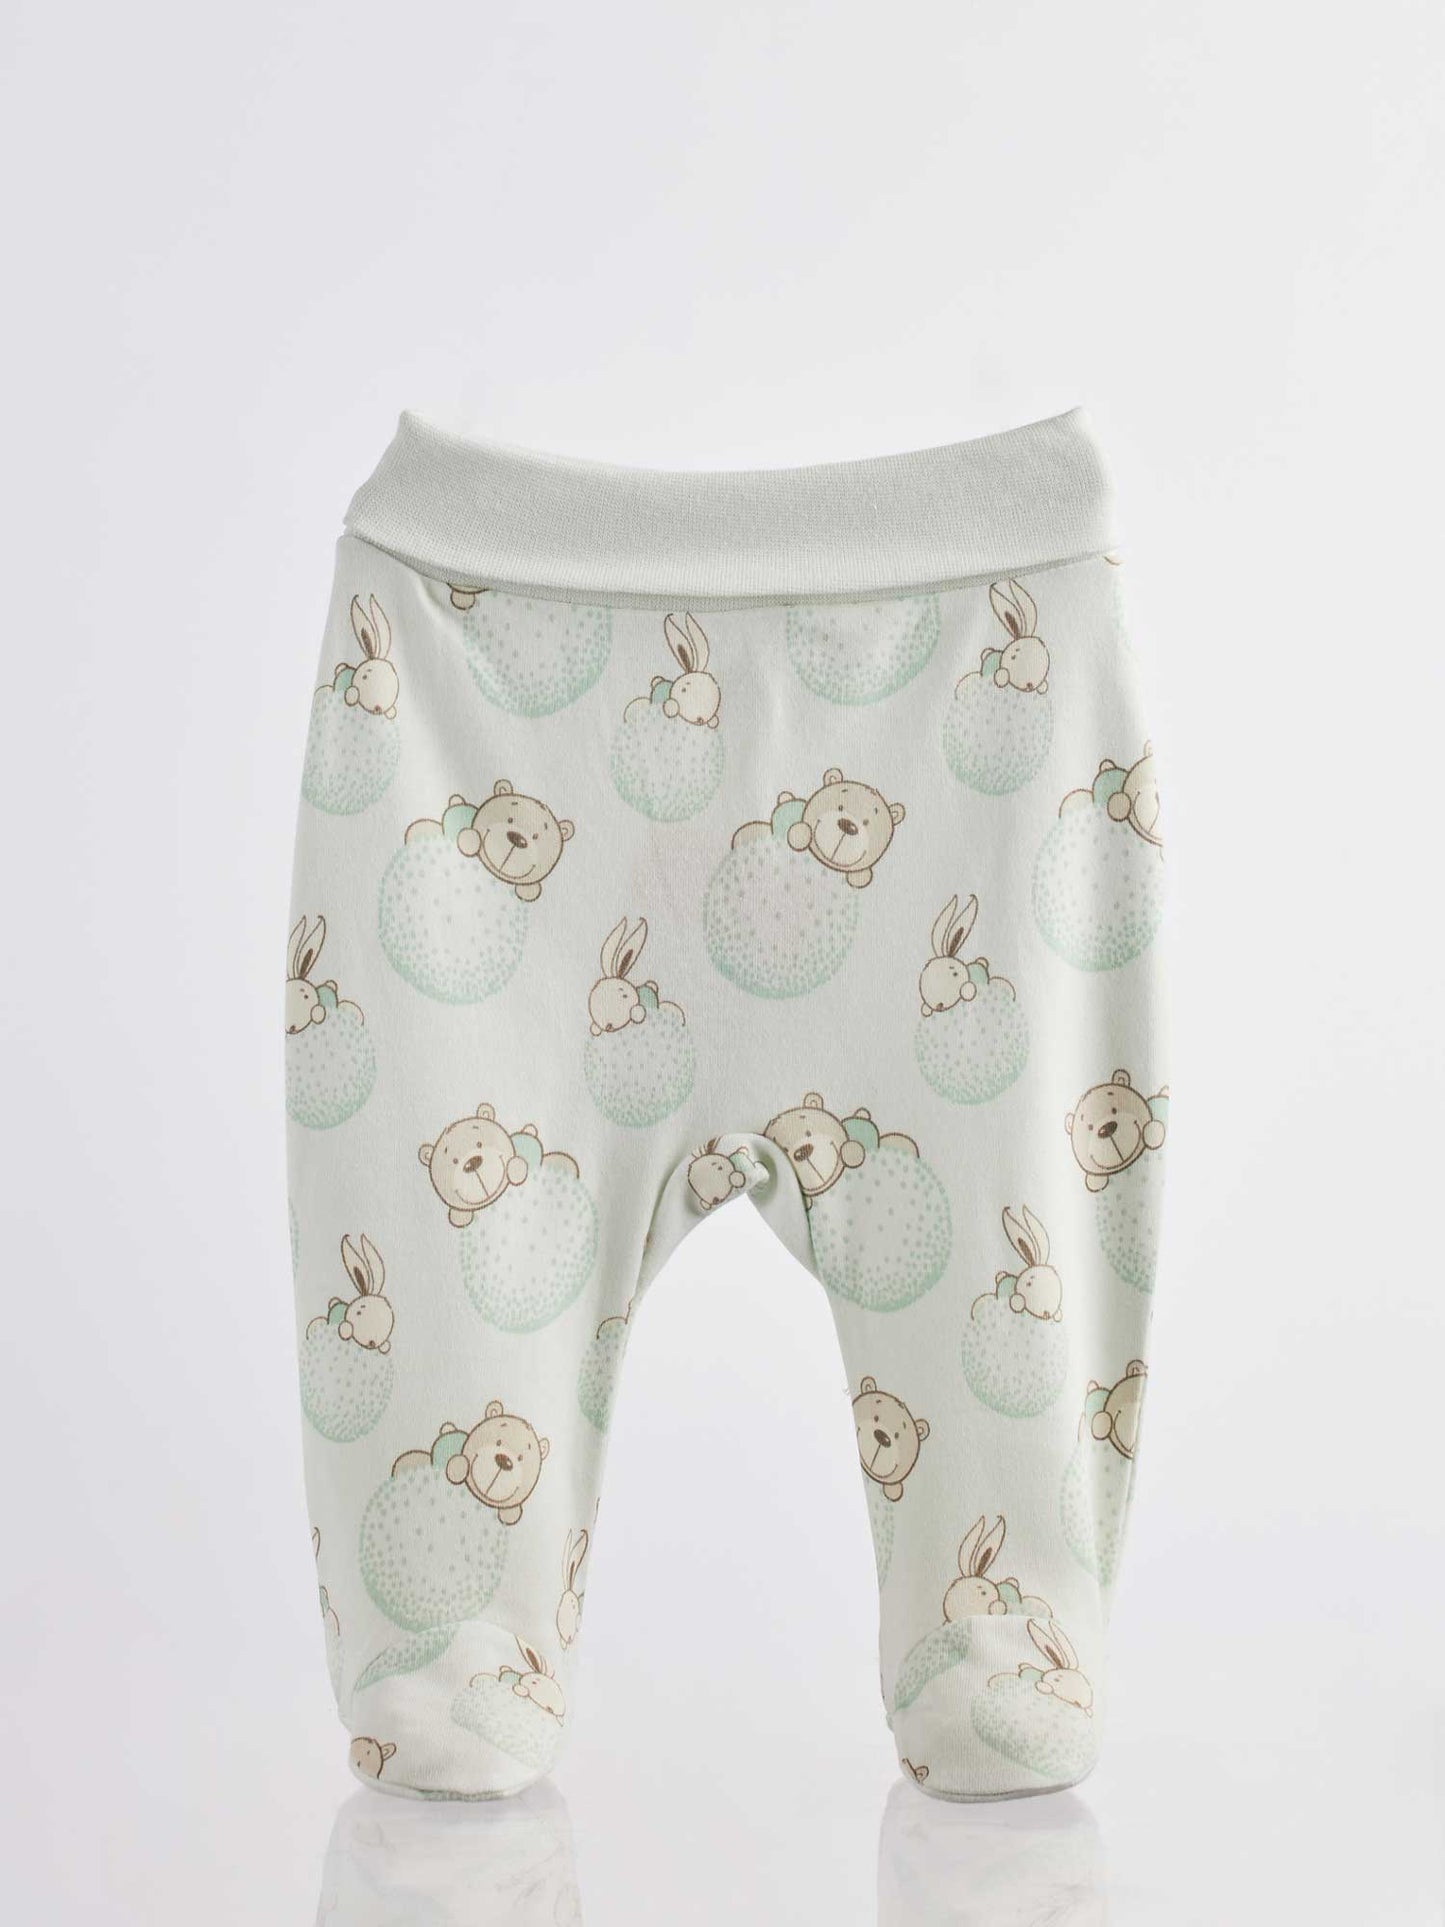 The Infant Pants Bear & Bunny 372 are ideal for your baby's everyday use. These pants feature a wide elastic waistband that won't squeeze or constrict your baby's belly as they play and discover. 